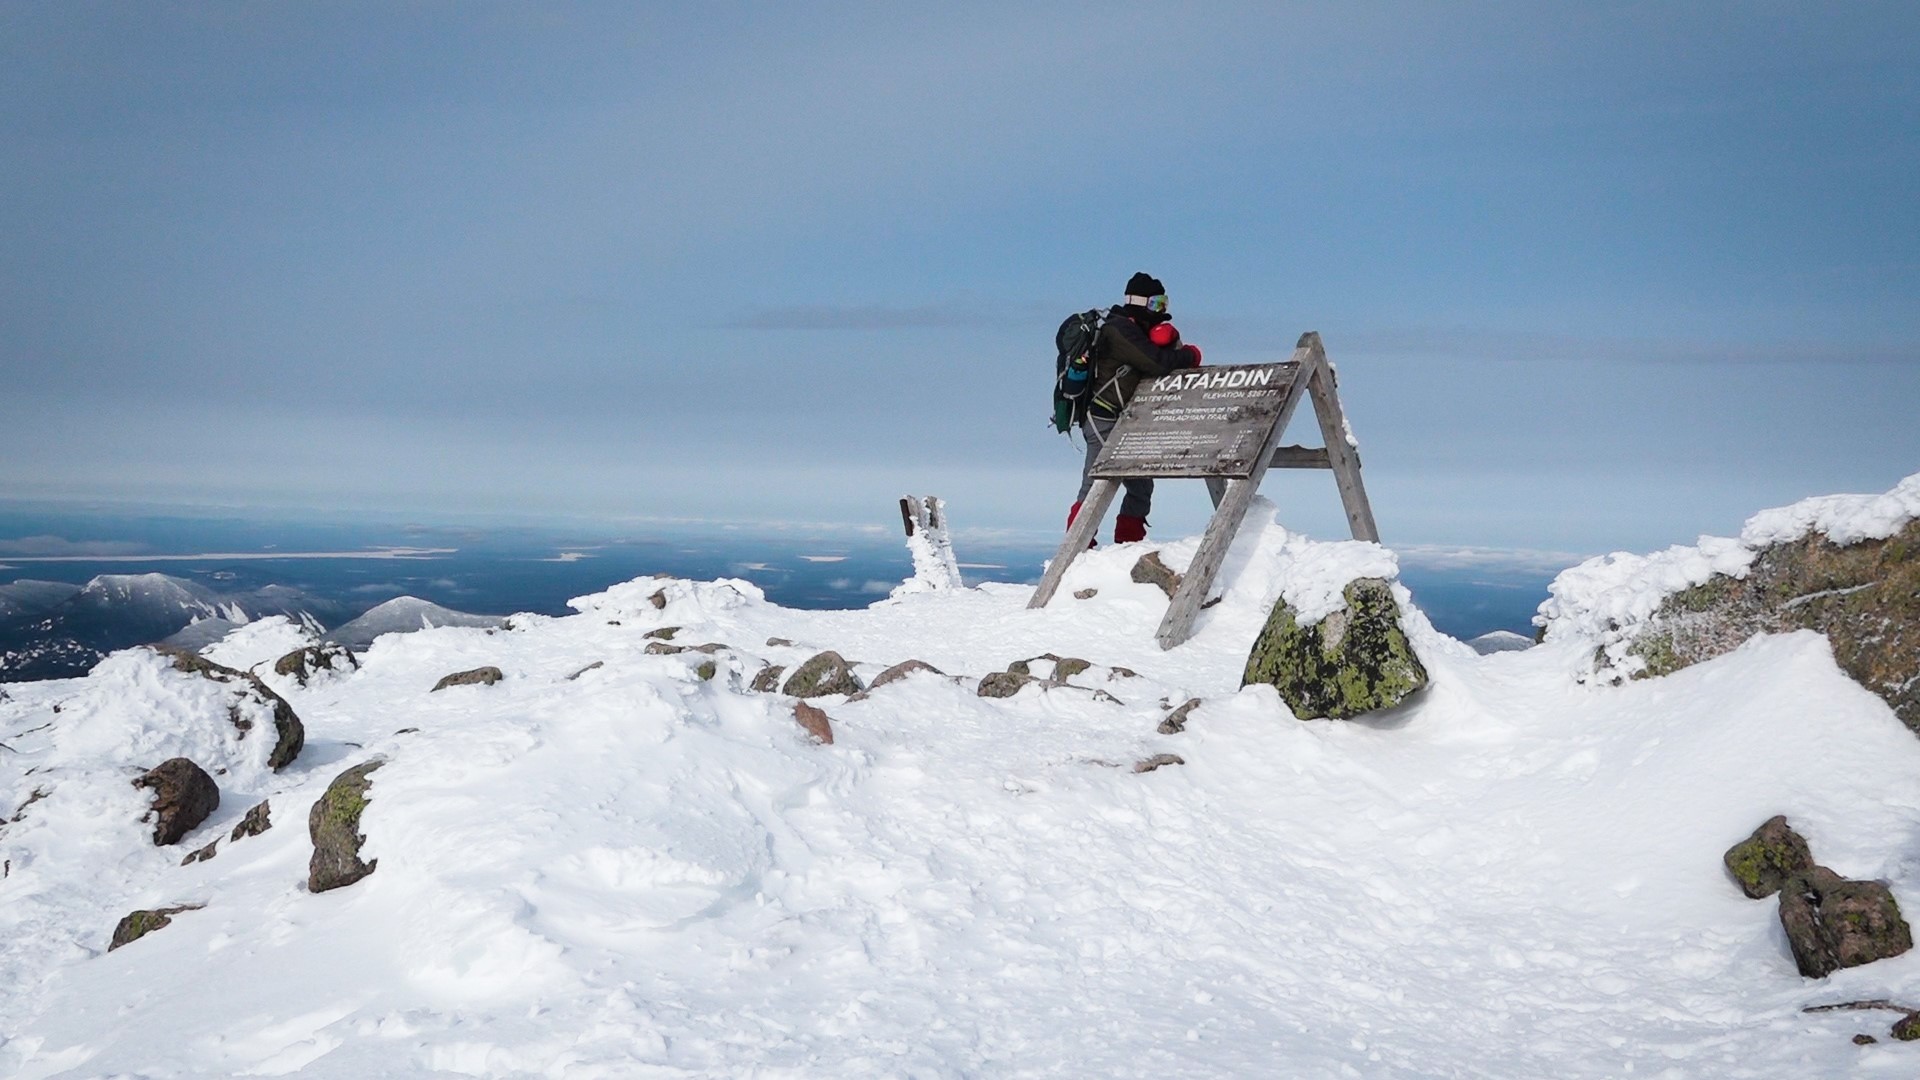 The effort is far worth the view. A winter summit of Katahdin is a labor of love and perseverance.